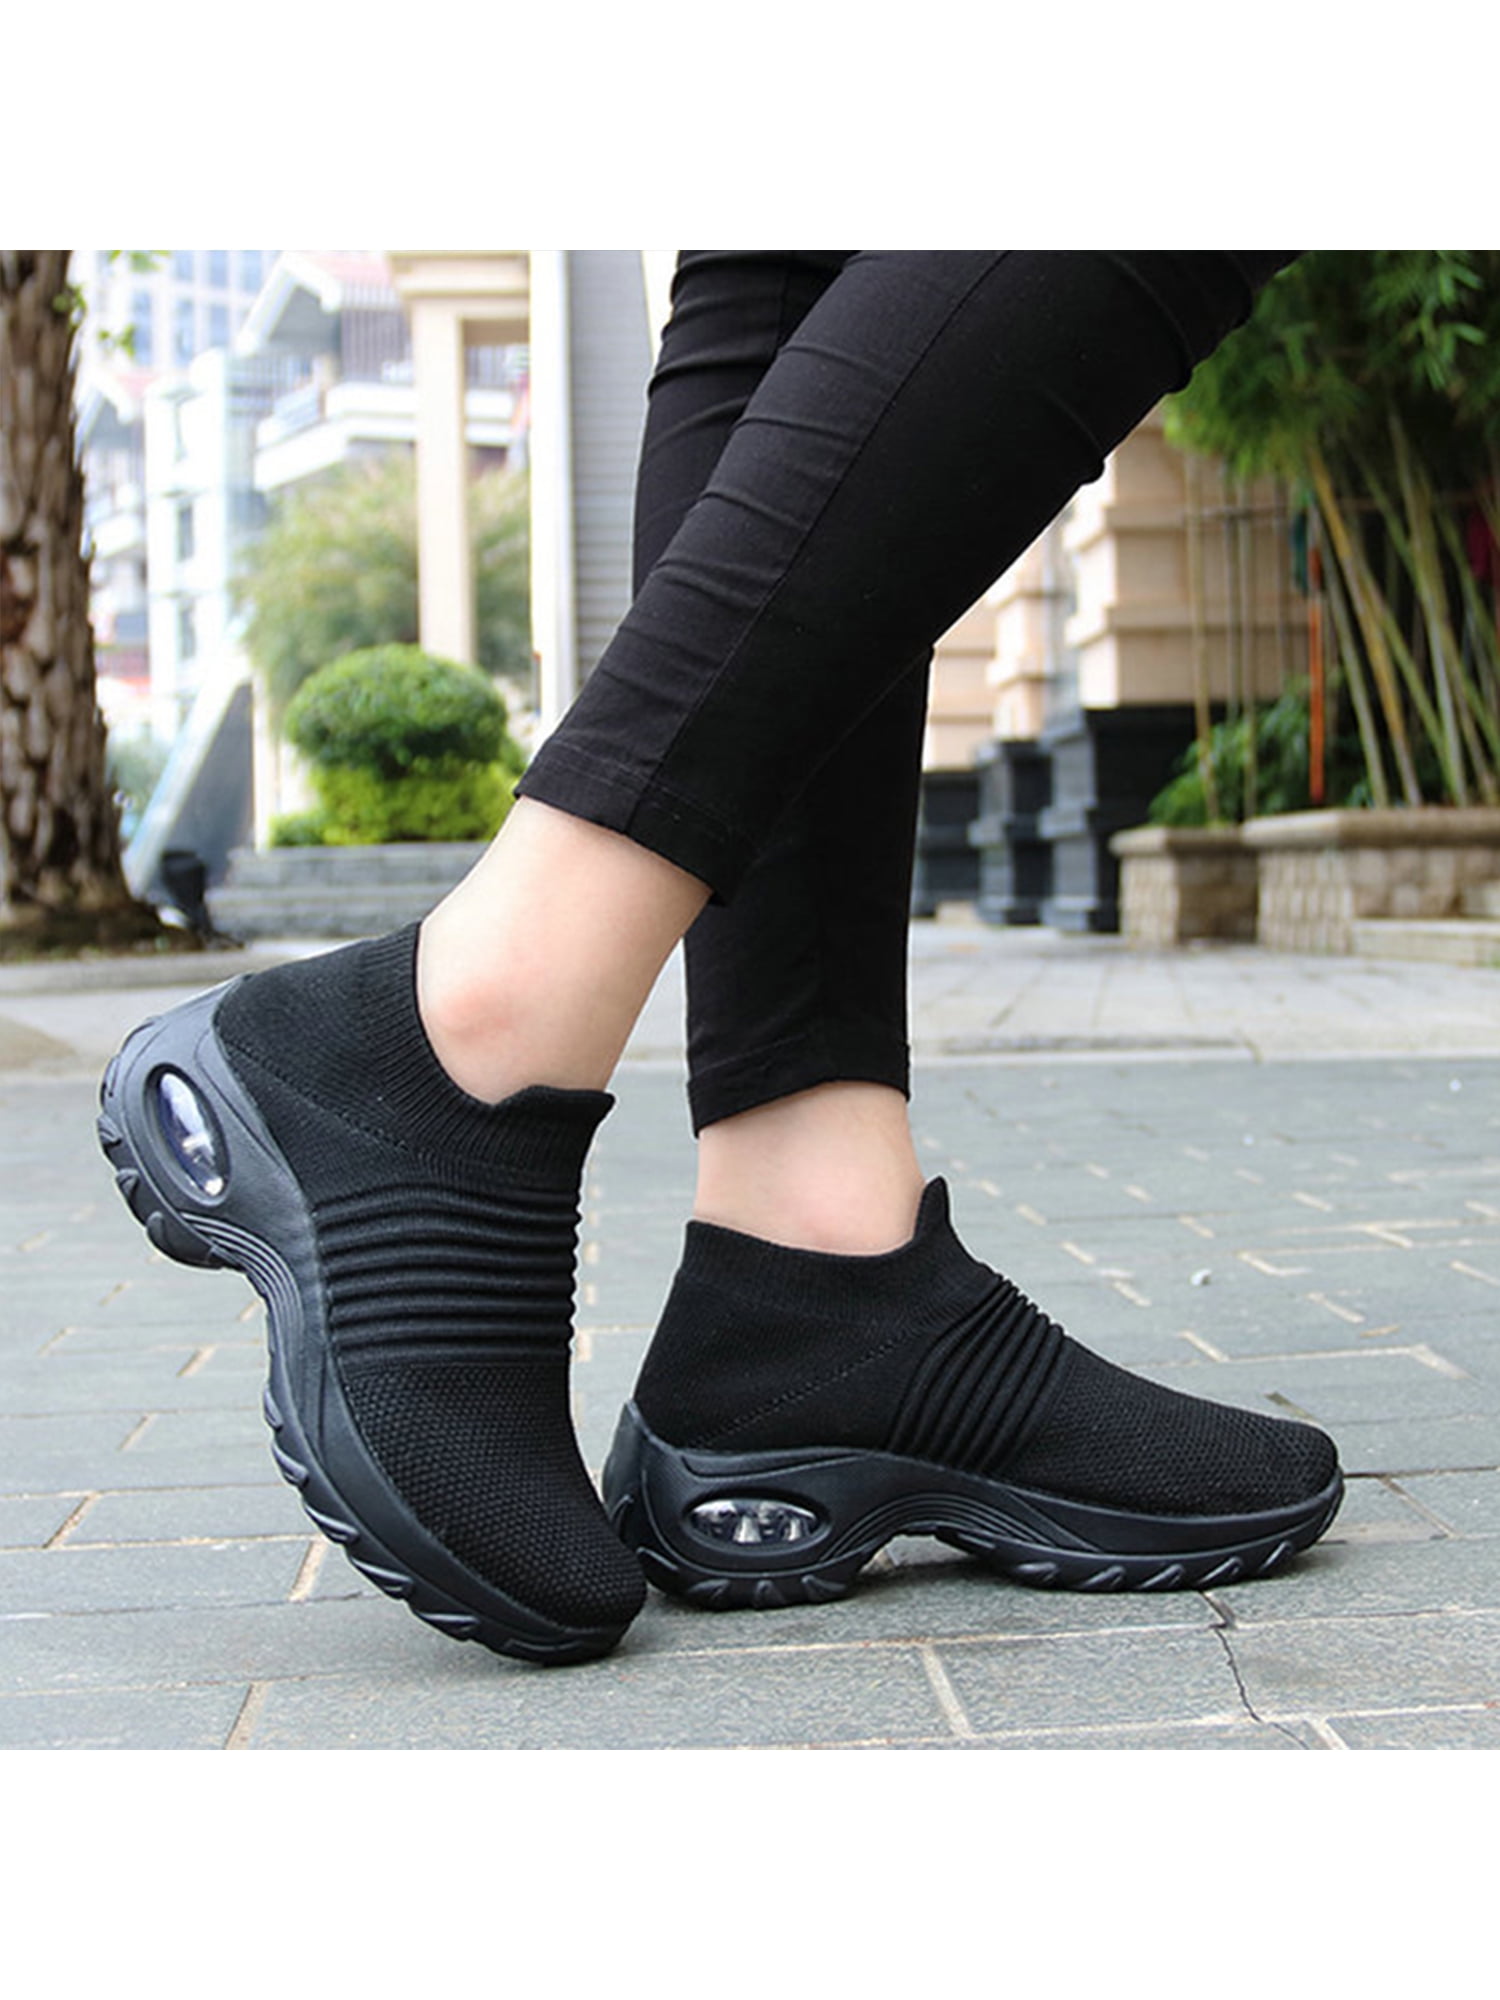 Women's Walking Shoes Sock Sneakers Slip on Mesh Air Cushion Comfortable Wedge Easy Shoes Platform Loafers 